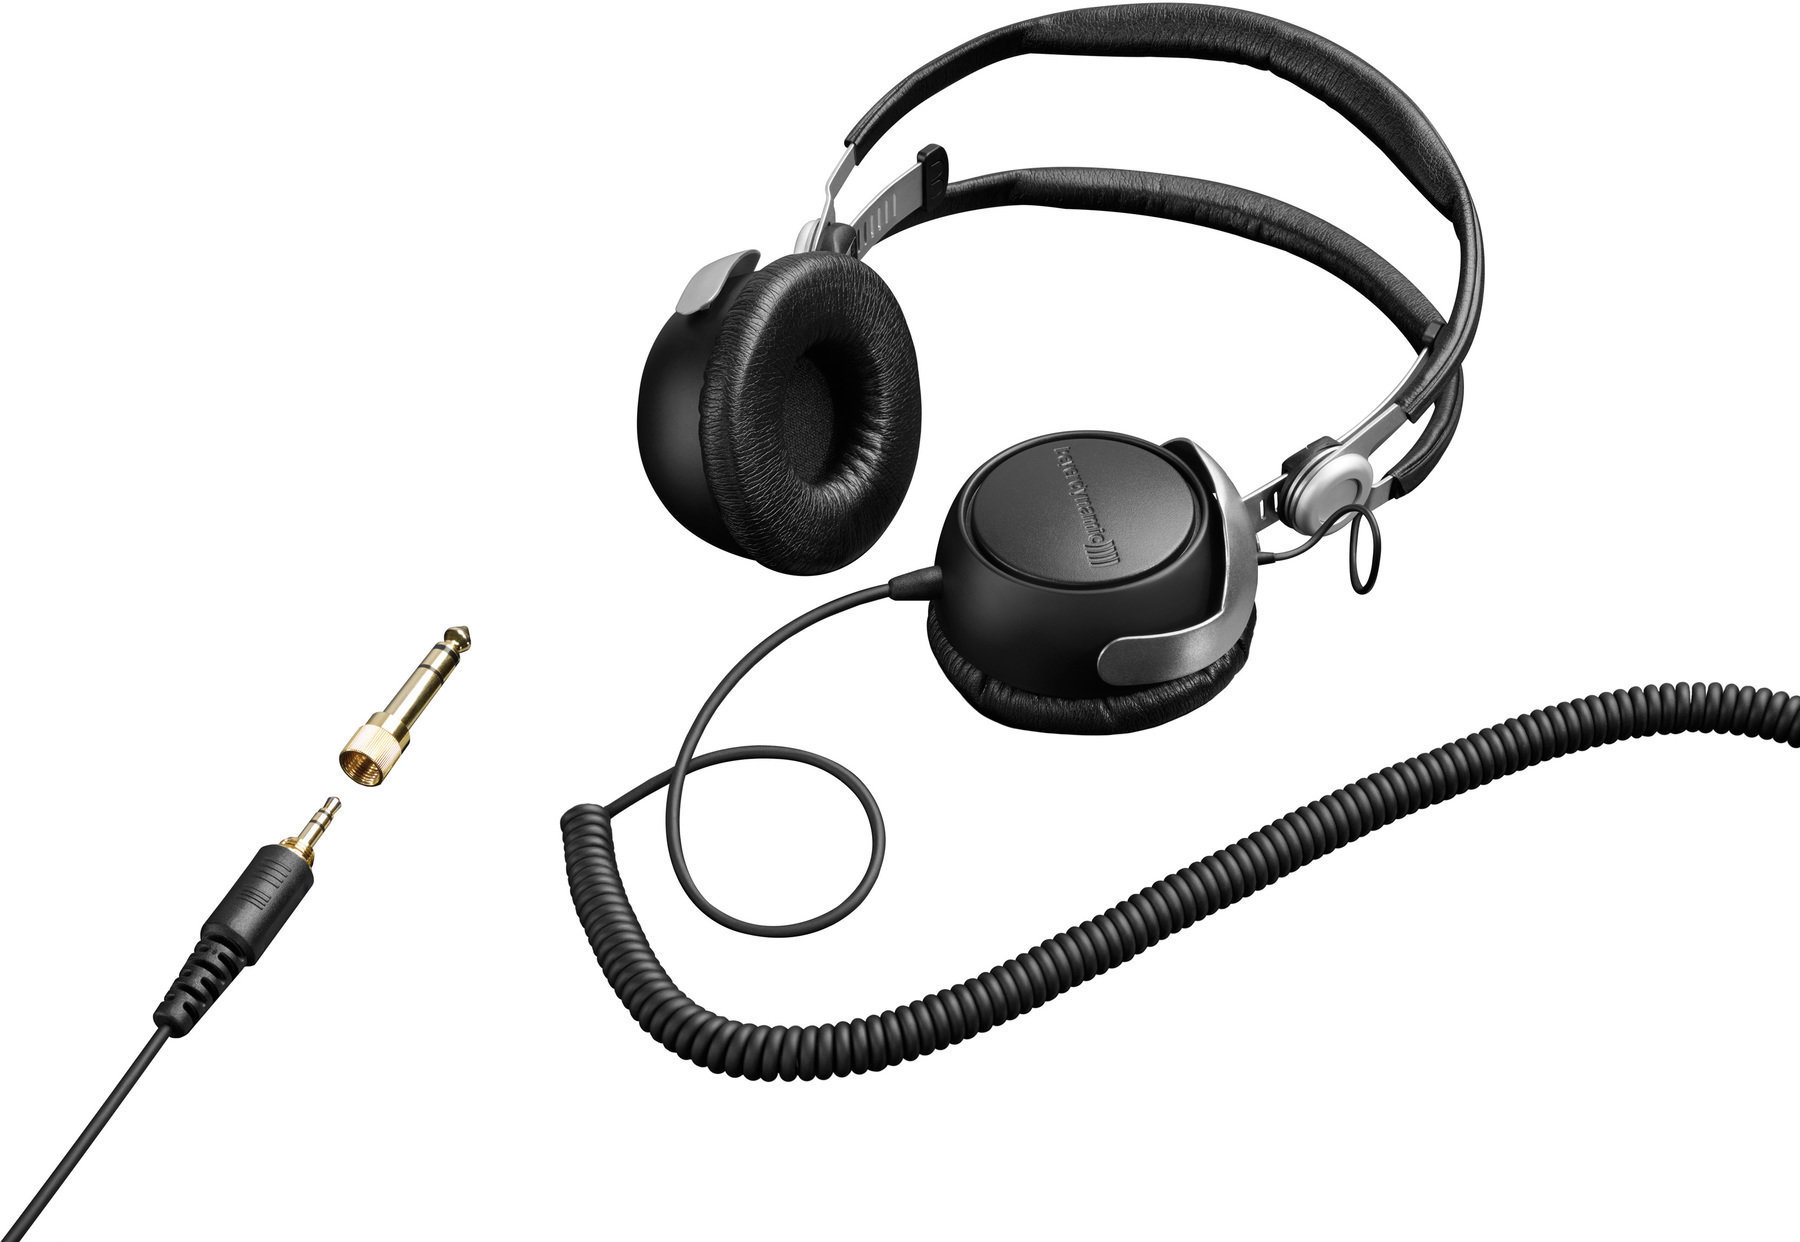 Cuffie DJ Beyerdynamic DT 1350 CC Closed Headphones for DJ´s and Monitoring